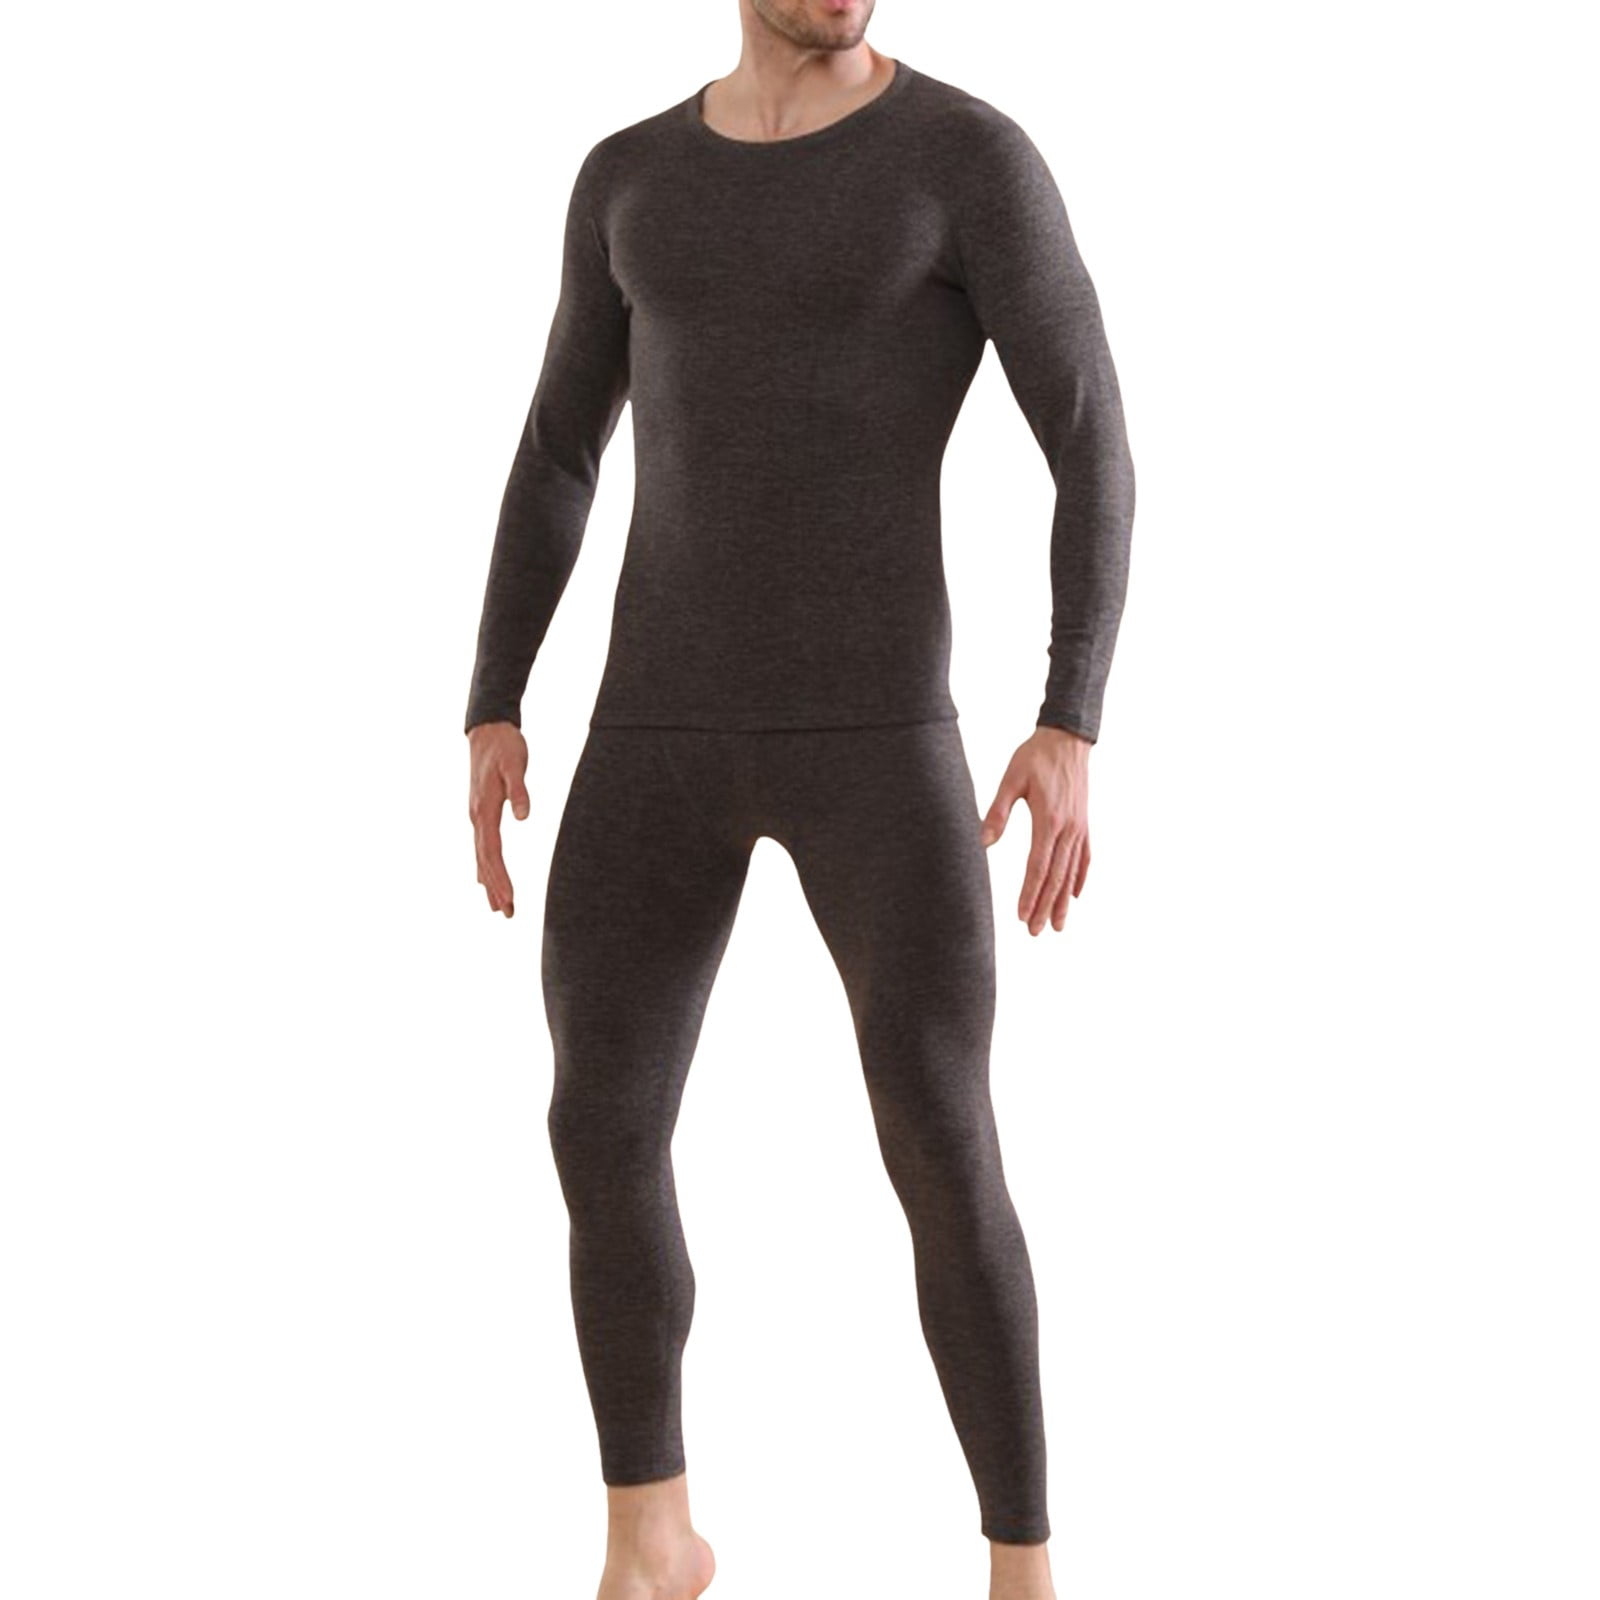 Essential's Men's Big and Tall Thermal Waffle Knit Long Johns